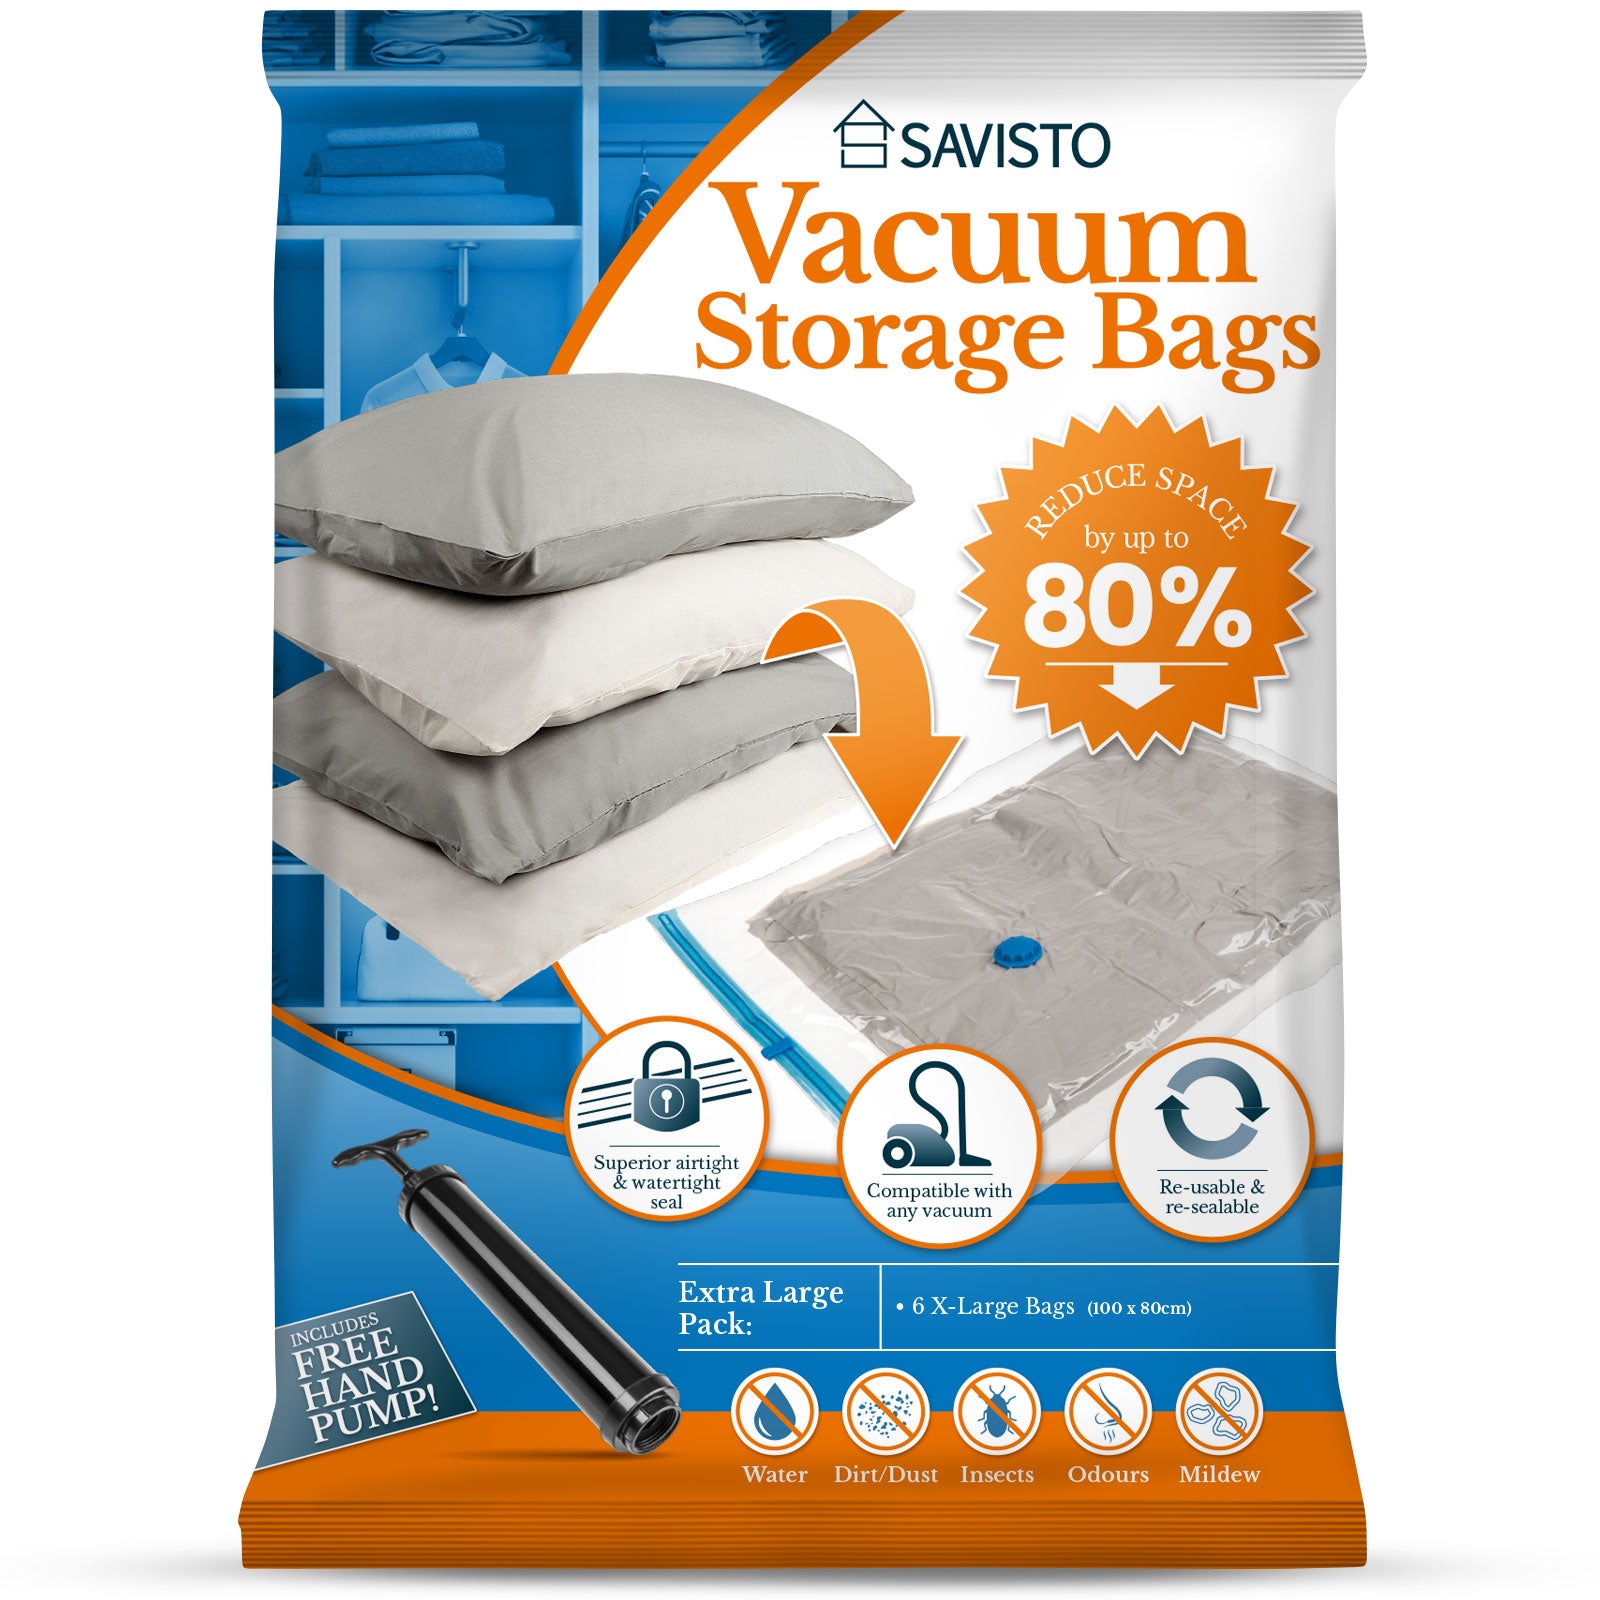 VazzLox 5 Vacuum Bags for Clothes with Pump Reusable plastic Bags for  Packing4xl for Clothes Space Saver Bag Compression Sealer Bags for Home   Travel 2S2M1L Size Vacuum Bags for Storage 